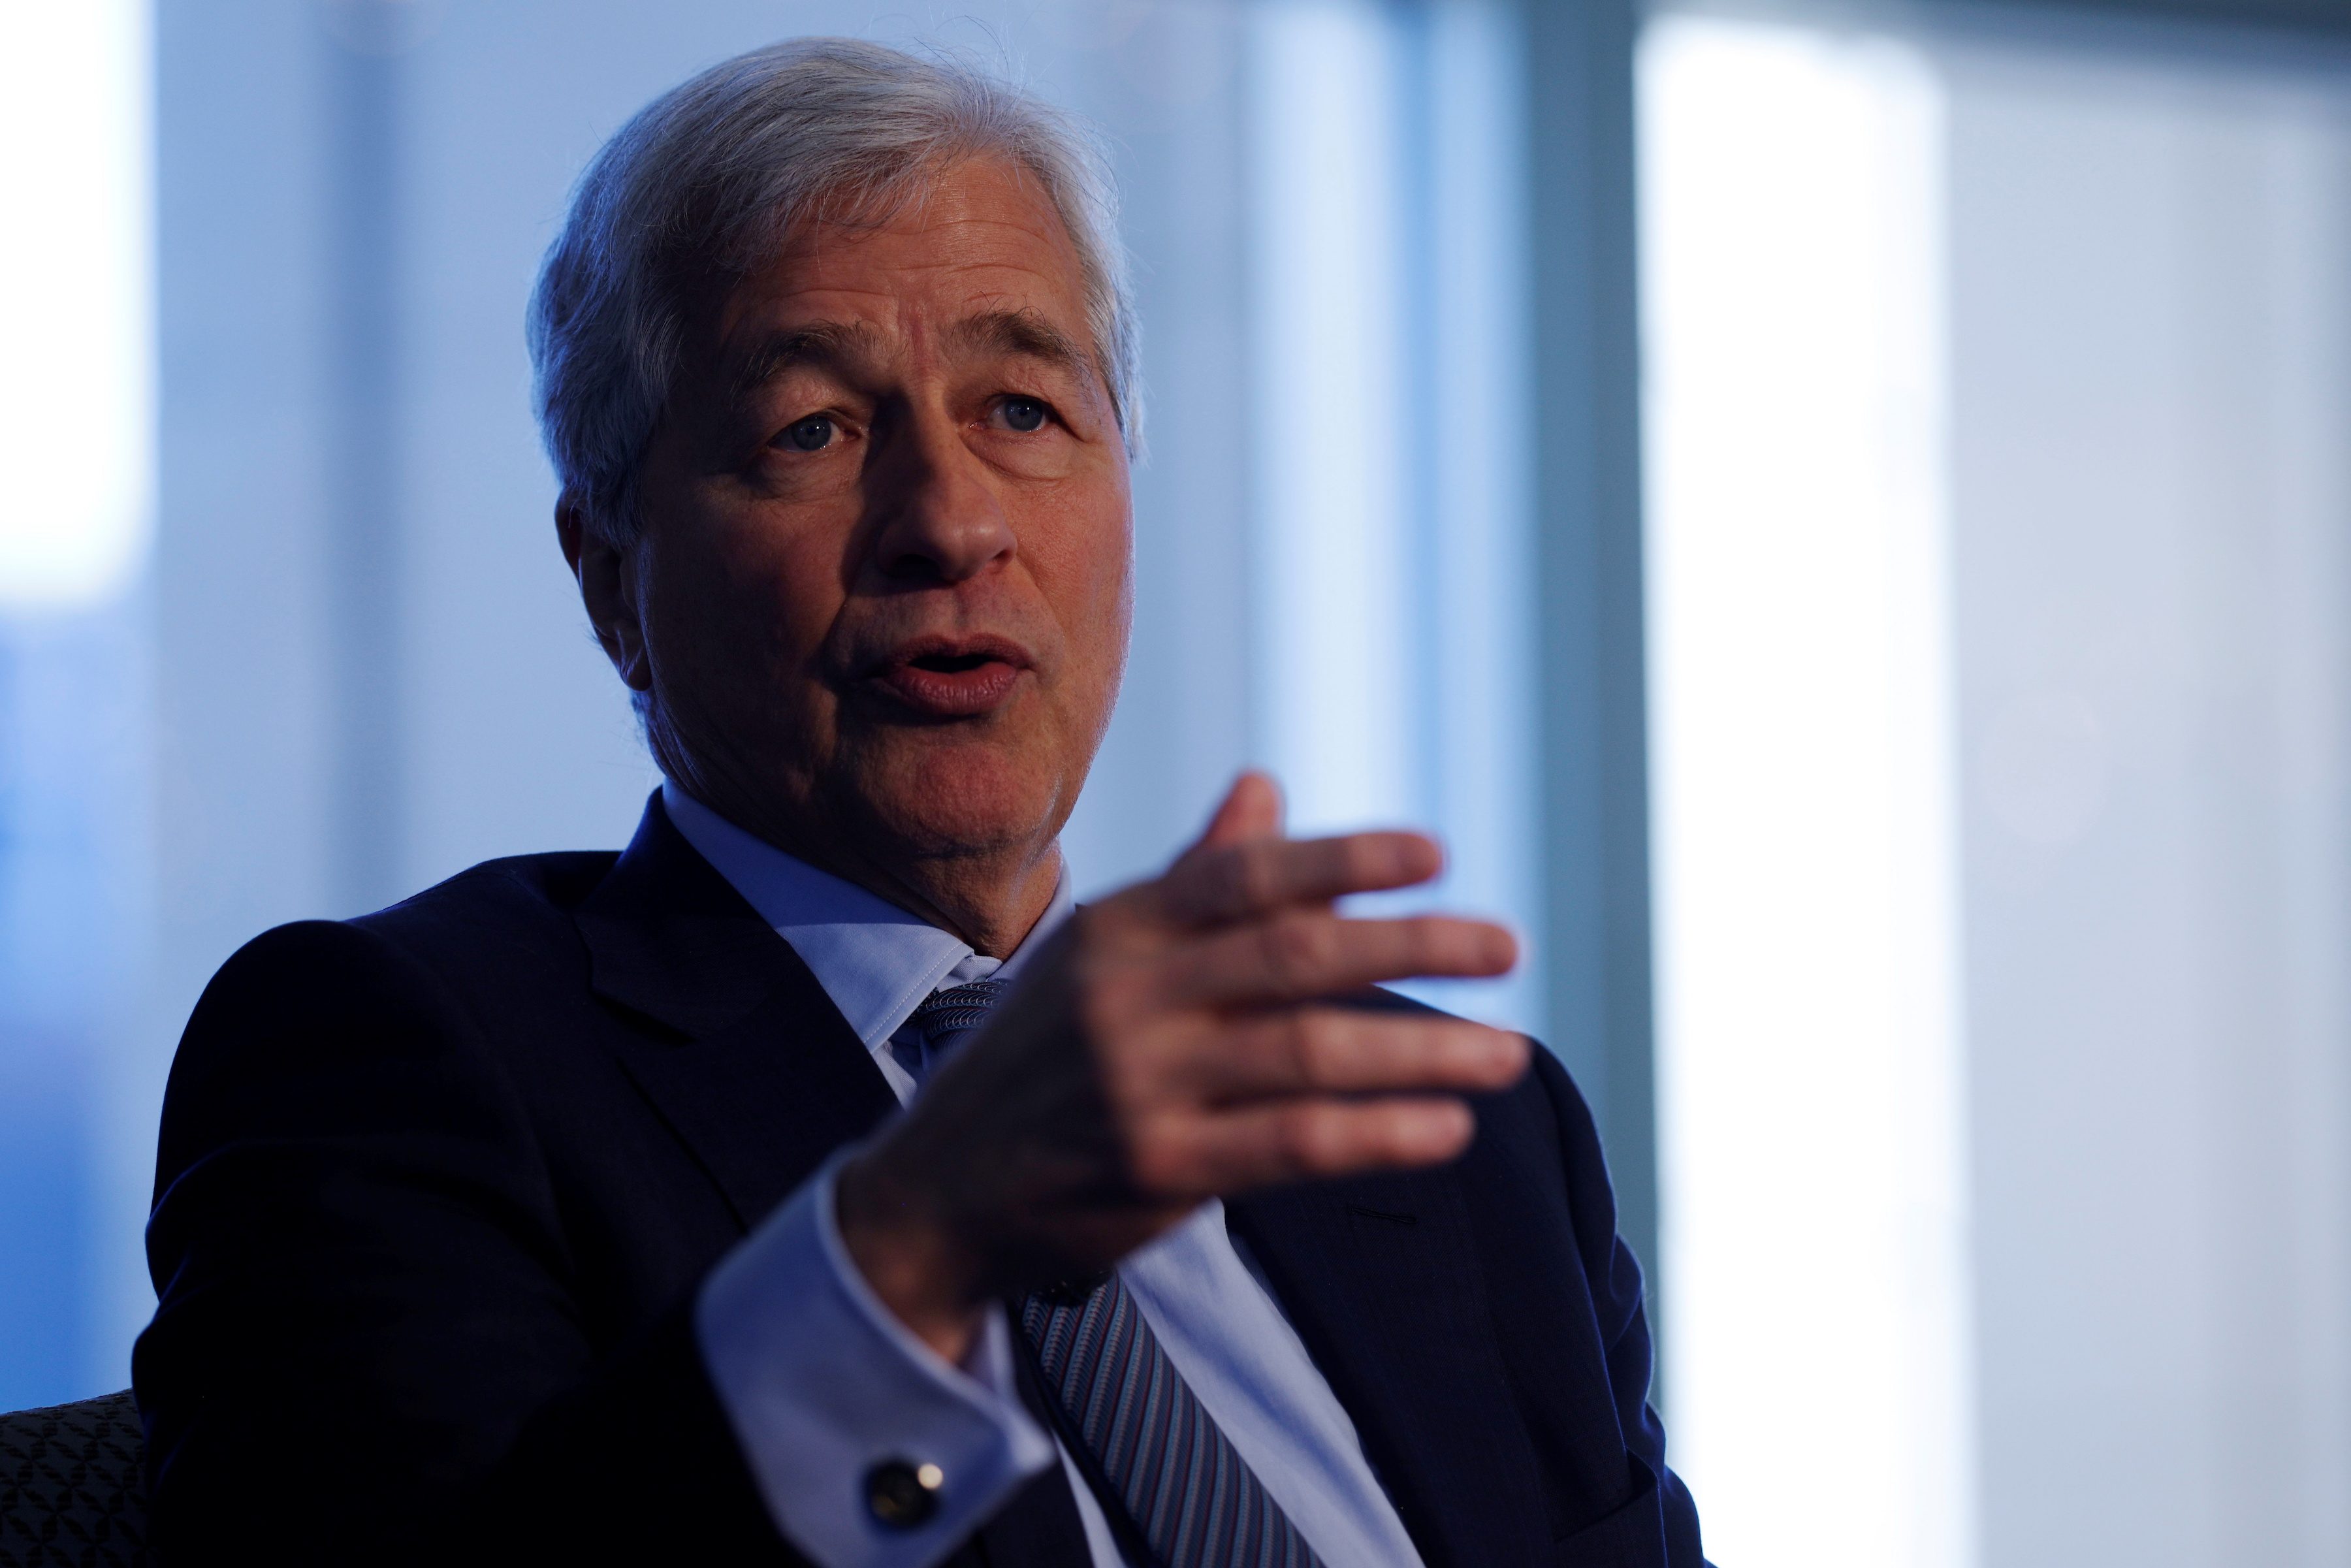 China ‘notes’ JPMorgan chief’s sincere regret over remark